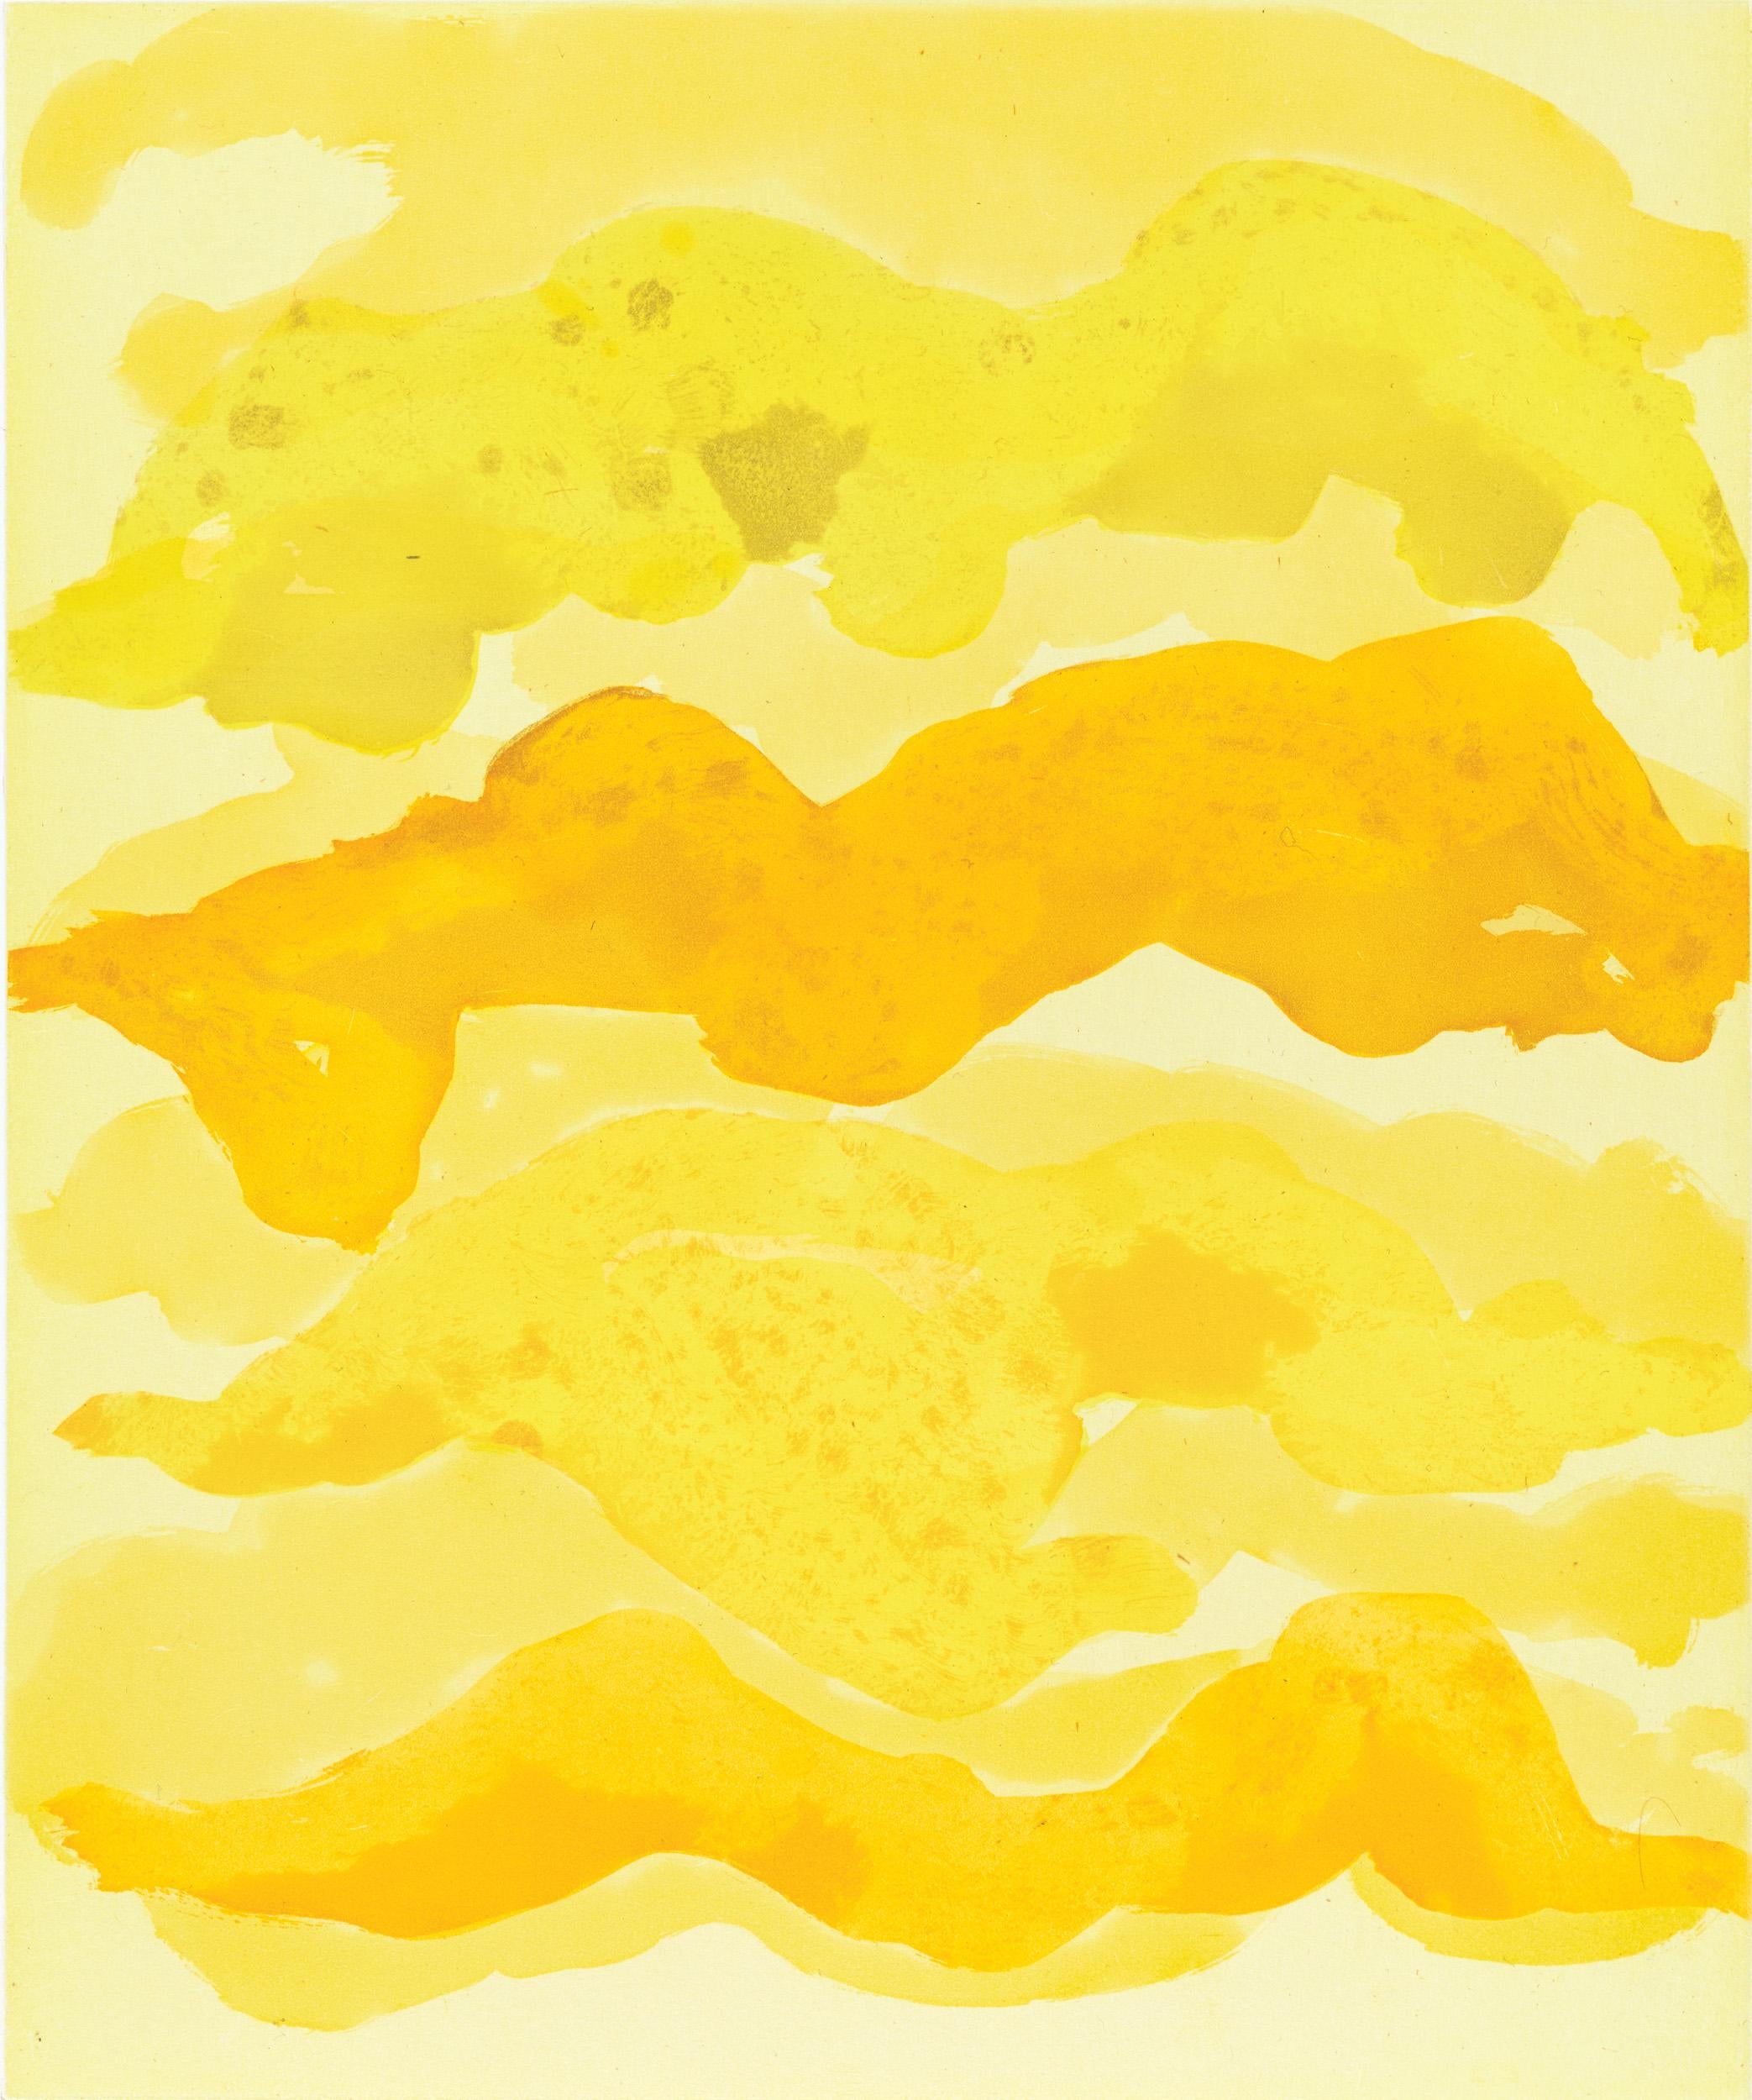 Mary Heilmann Abstract Print – Yellow Lineup